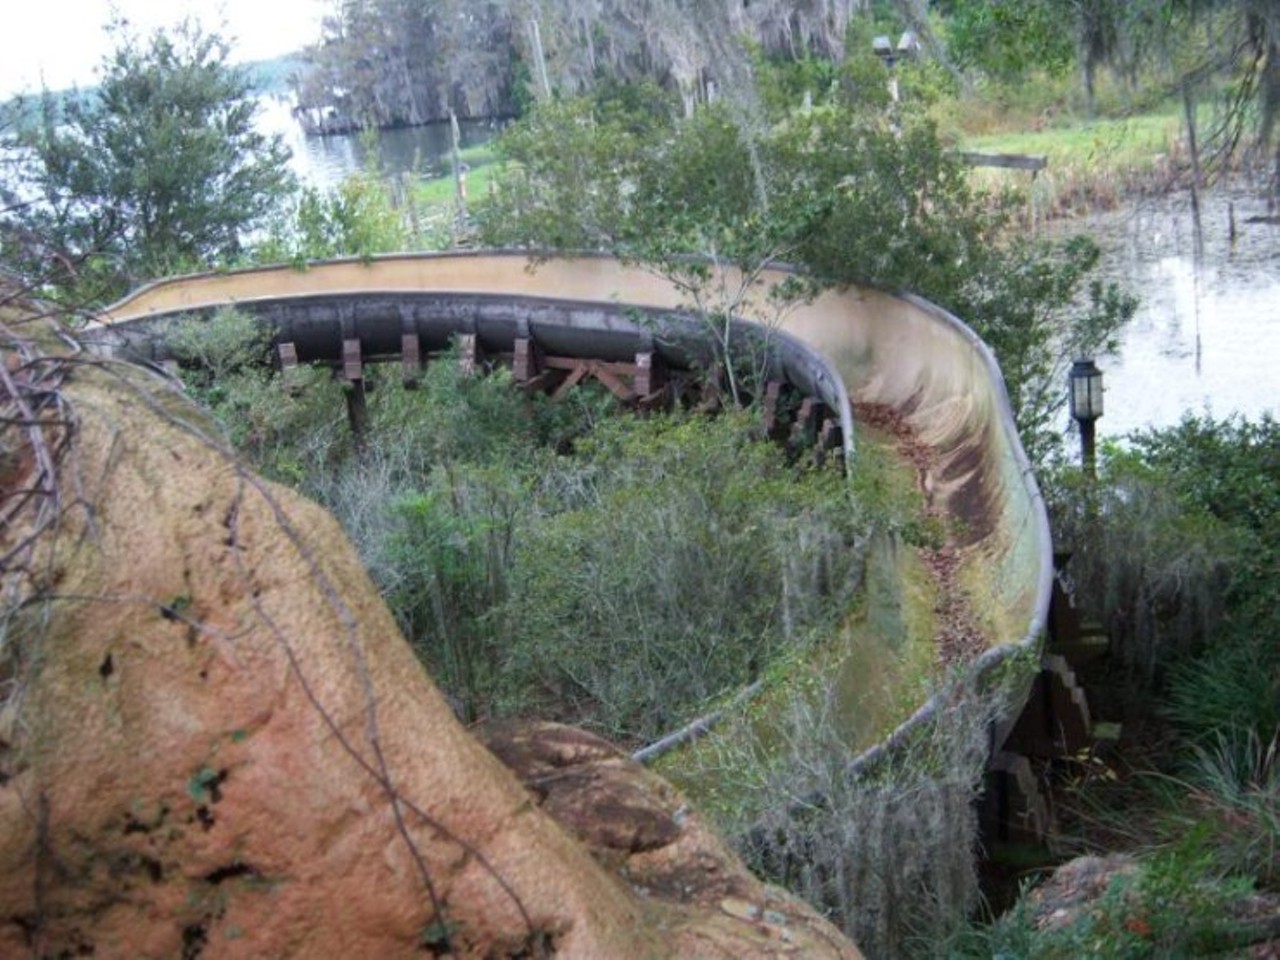 Even the waterslides are grown over. Via abandonedplaygrounds.com